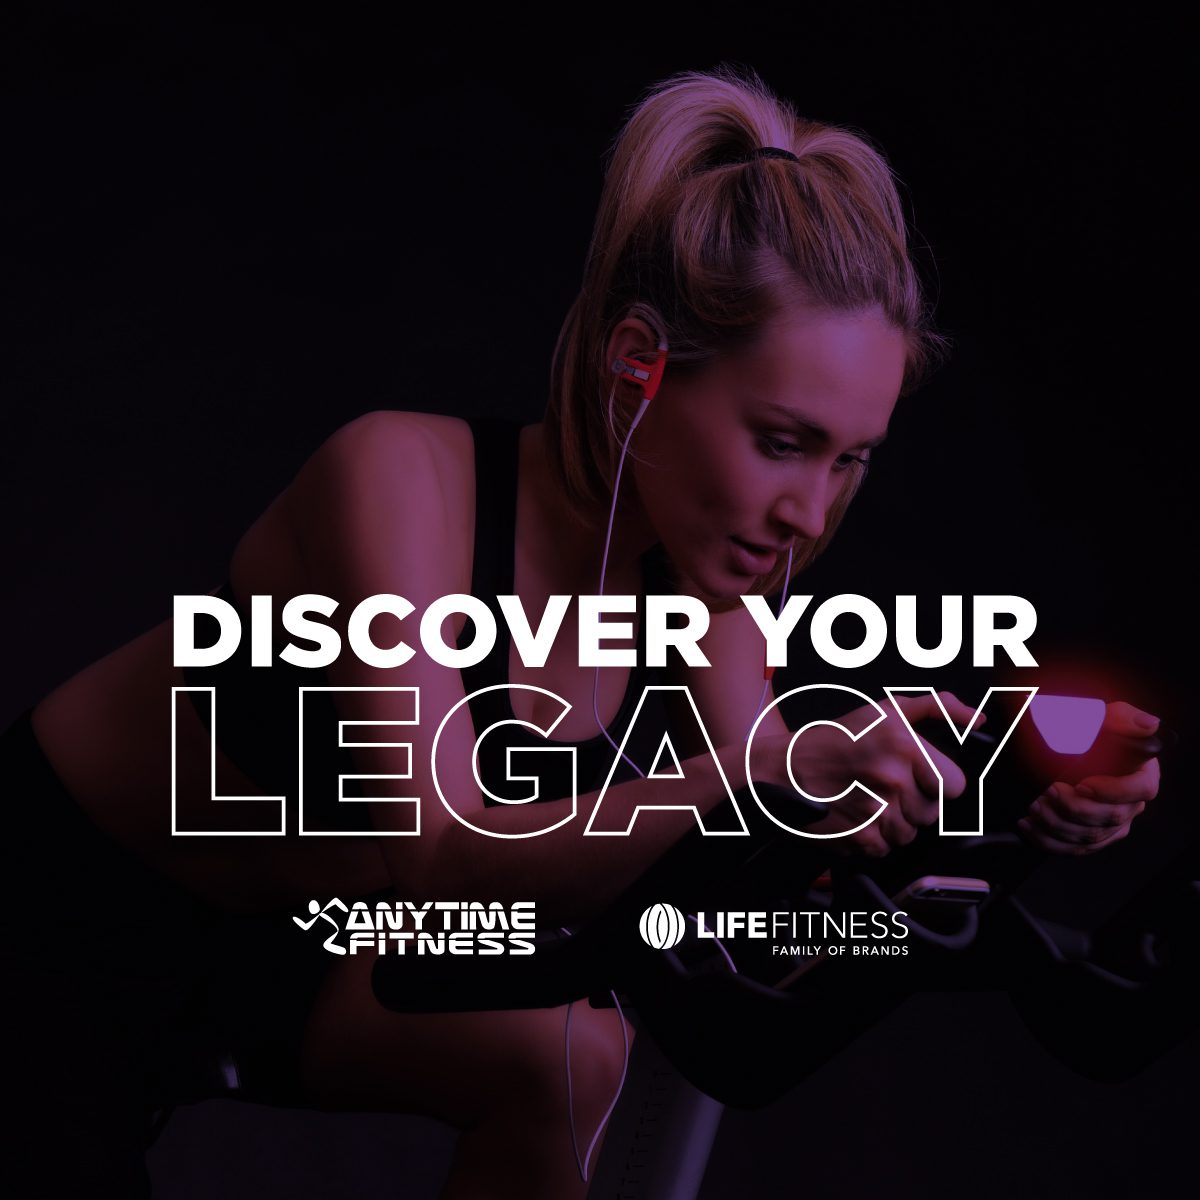 Anytime Fitness and Life Fitness marketing campaign